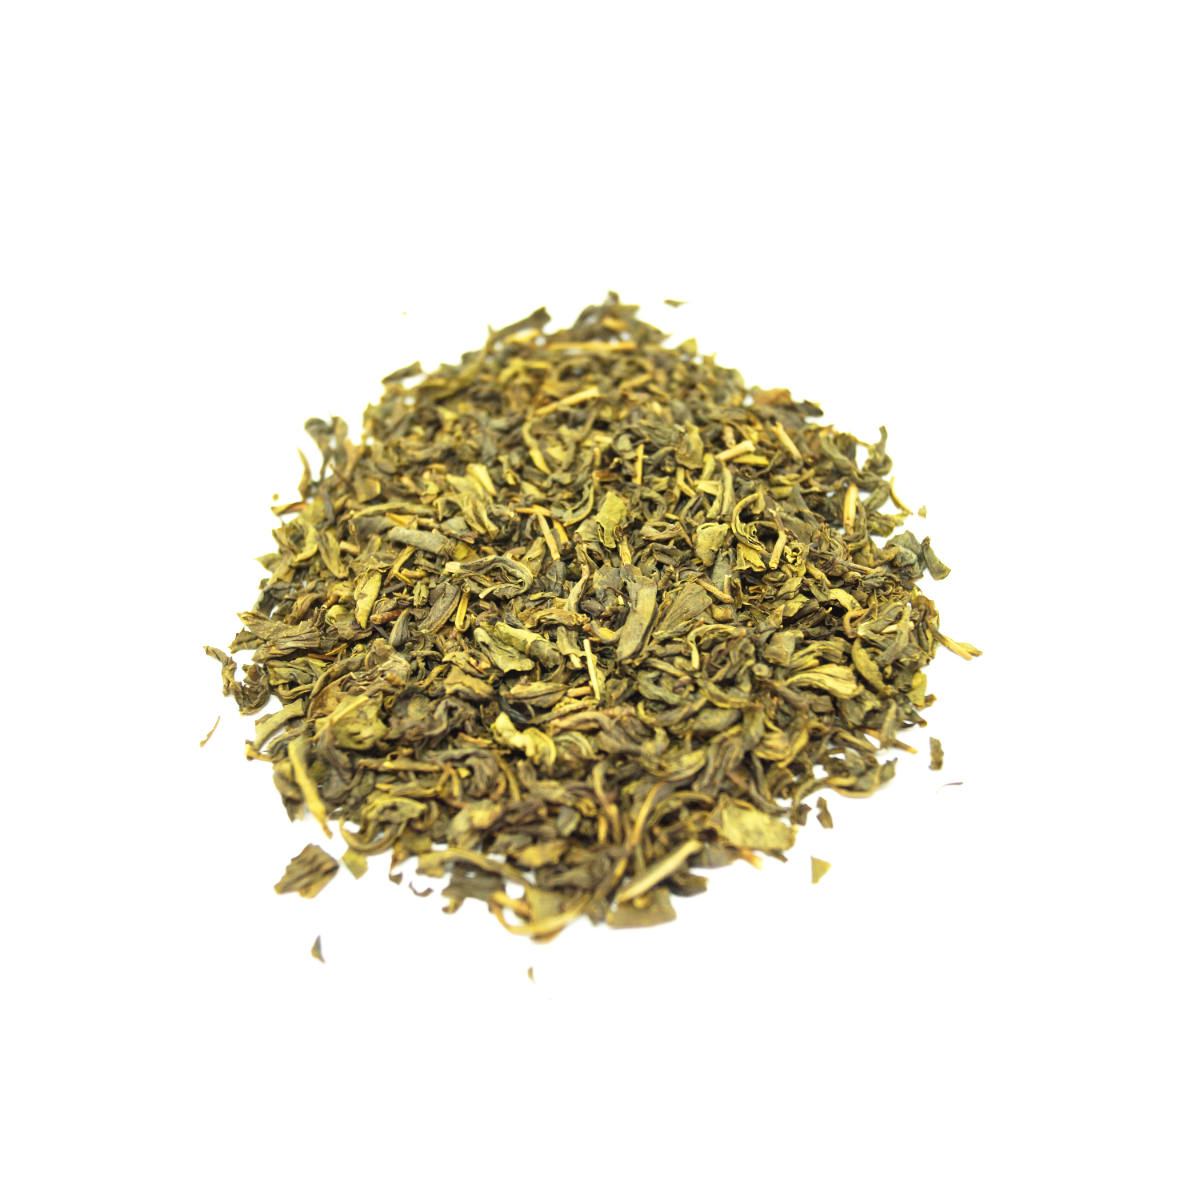 This green tea is such a traditional Green Tea from China that is dried with Jasmine flowers giving it a slightly floral taste.